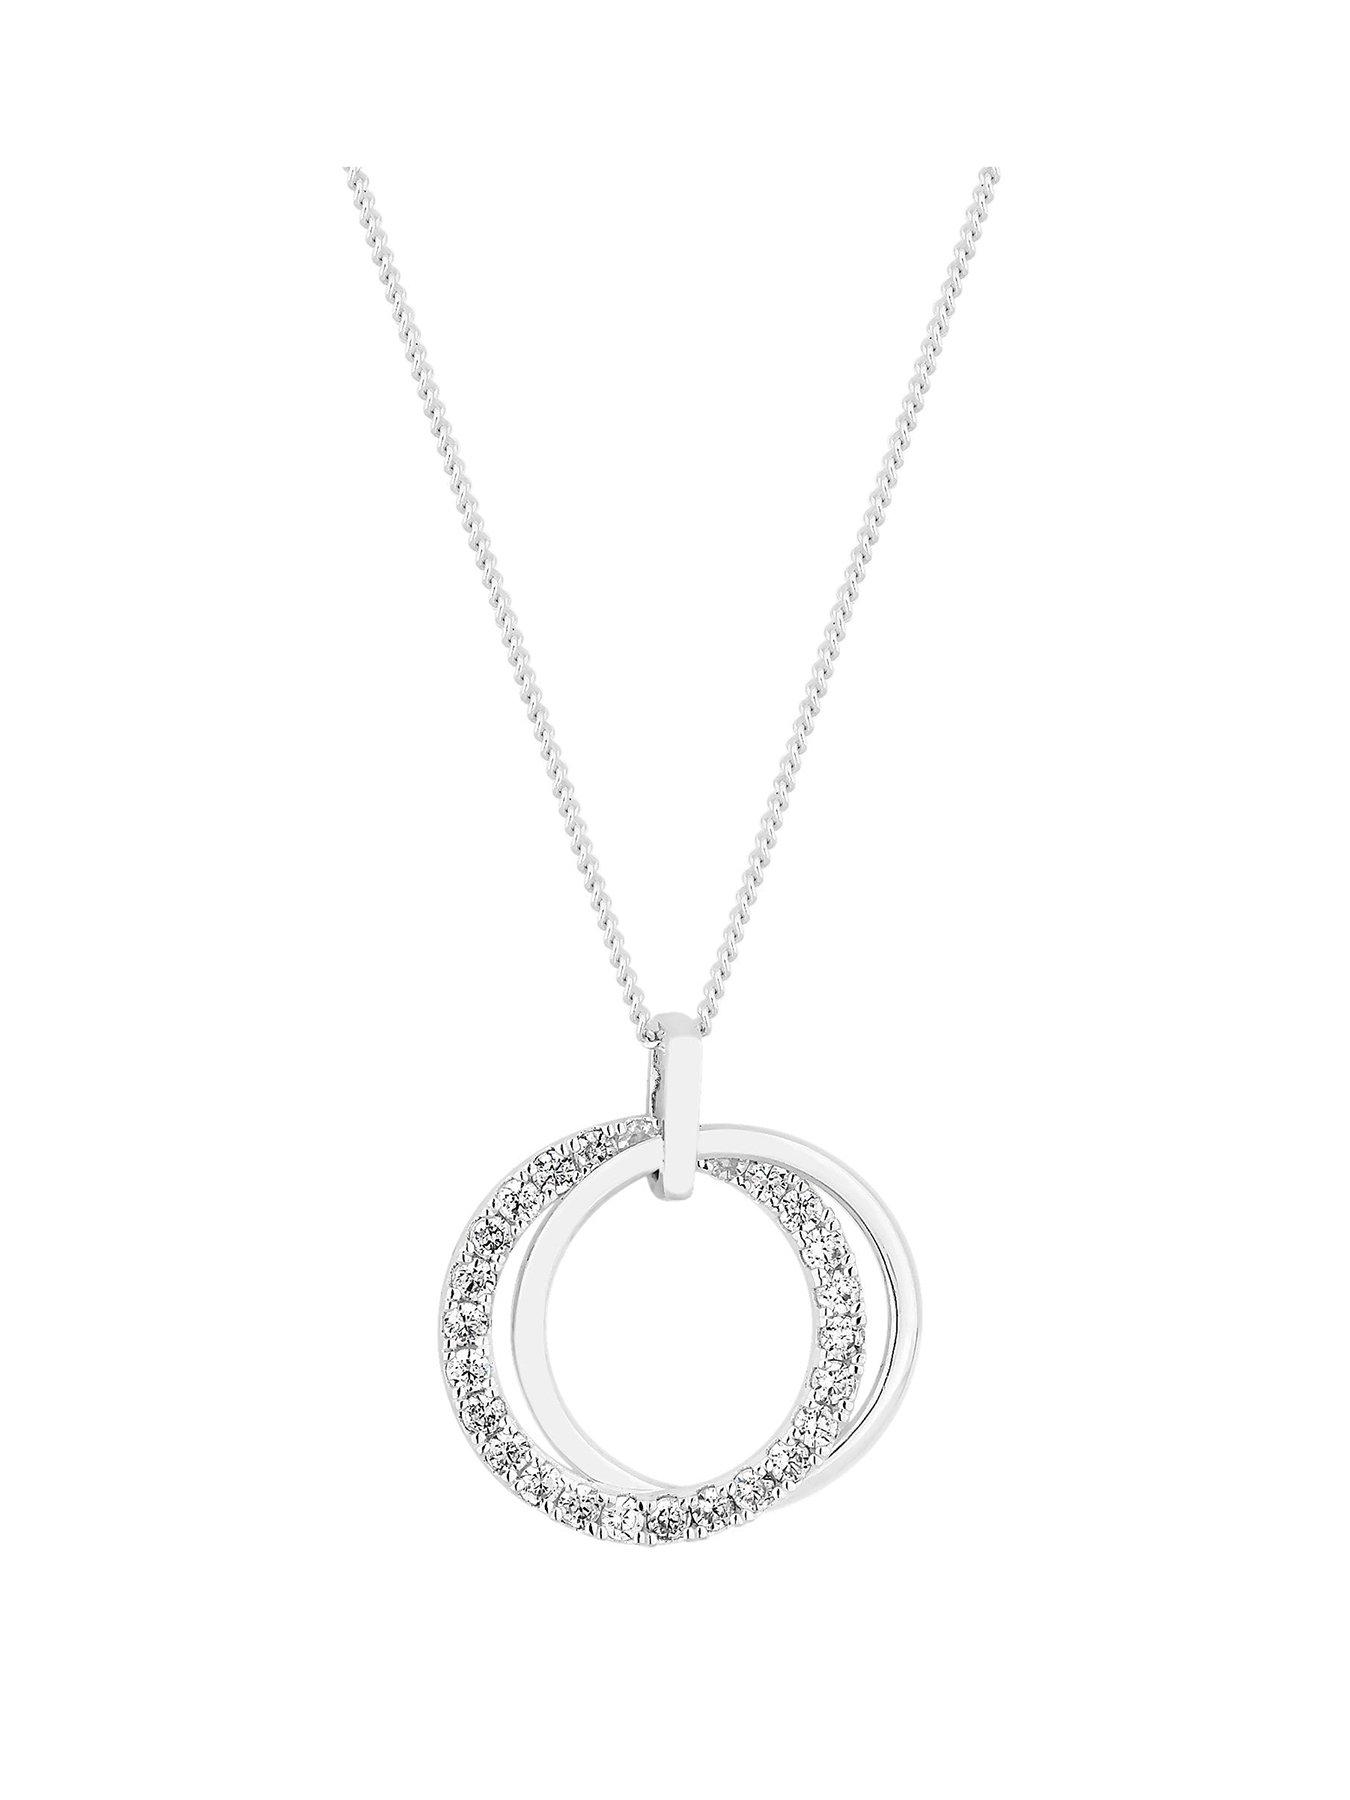  POLISHED AND CZ DOUBLE OPEN PENDANT